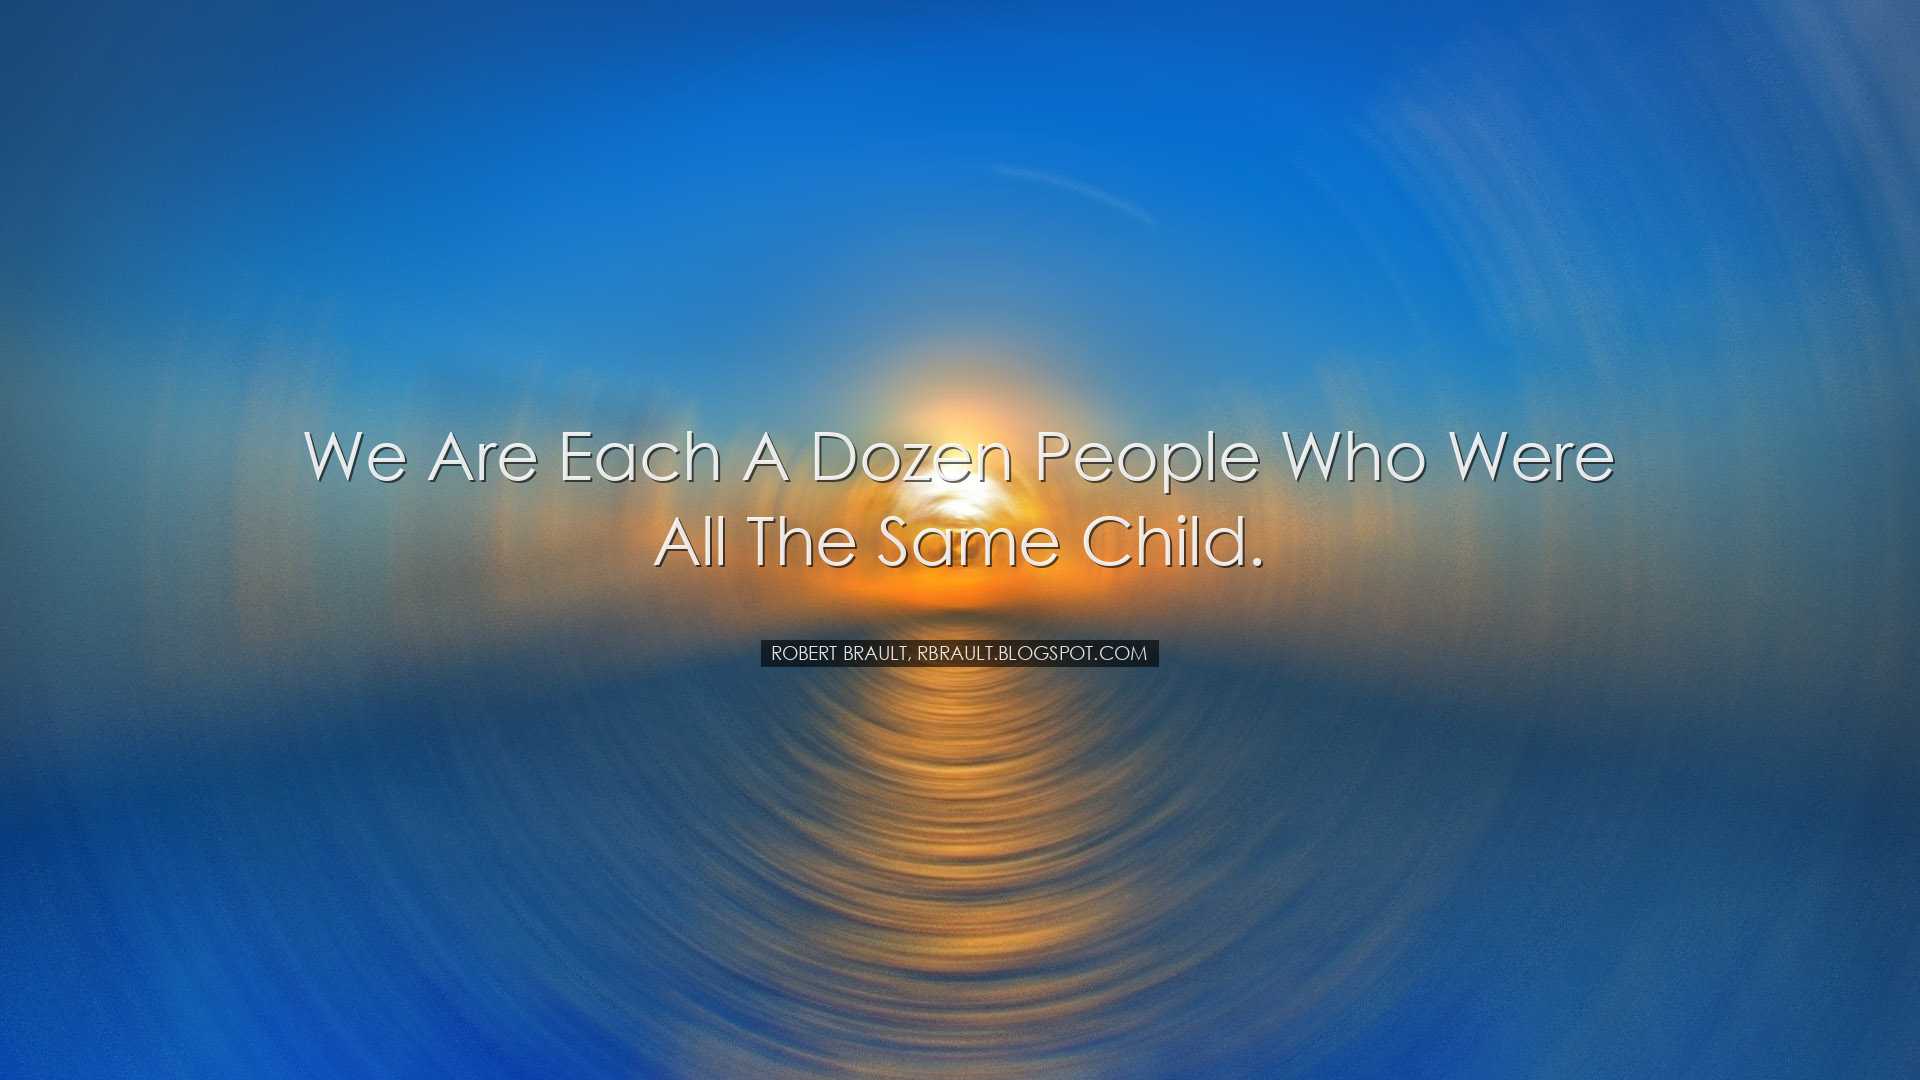 We are each a dozen people who were all the same child. - Robert B